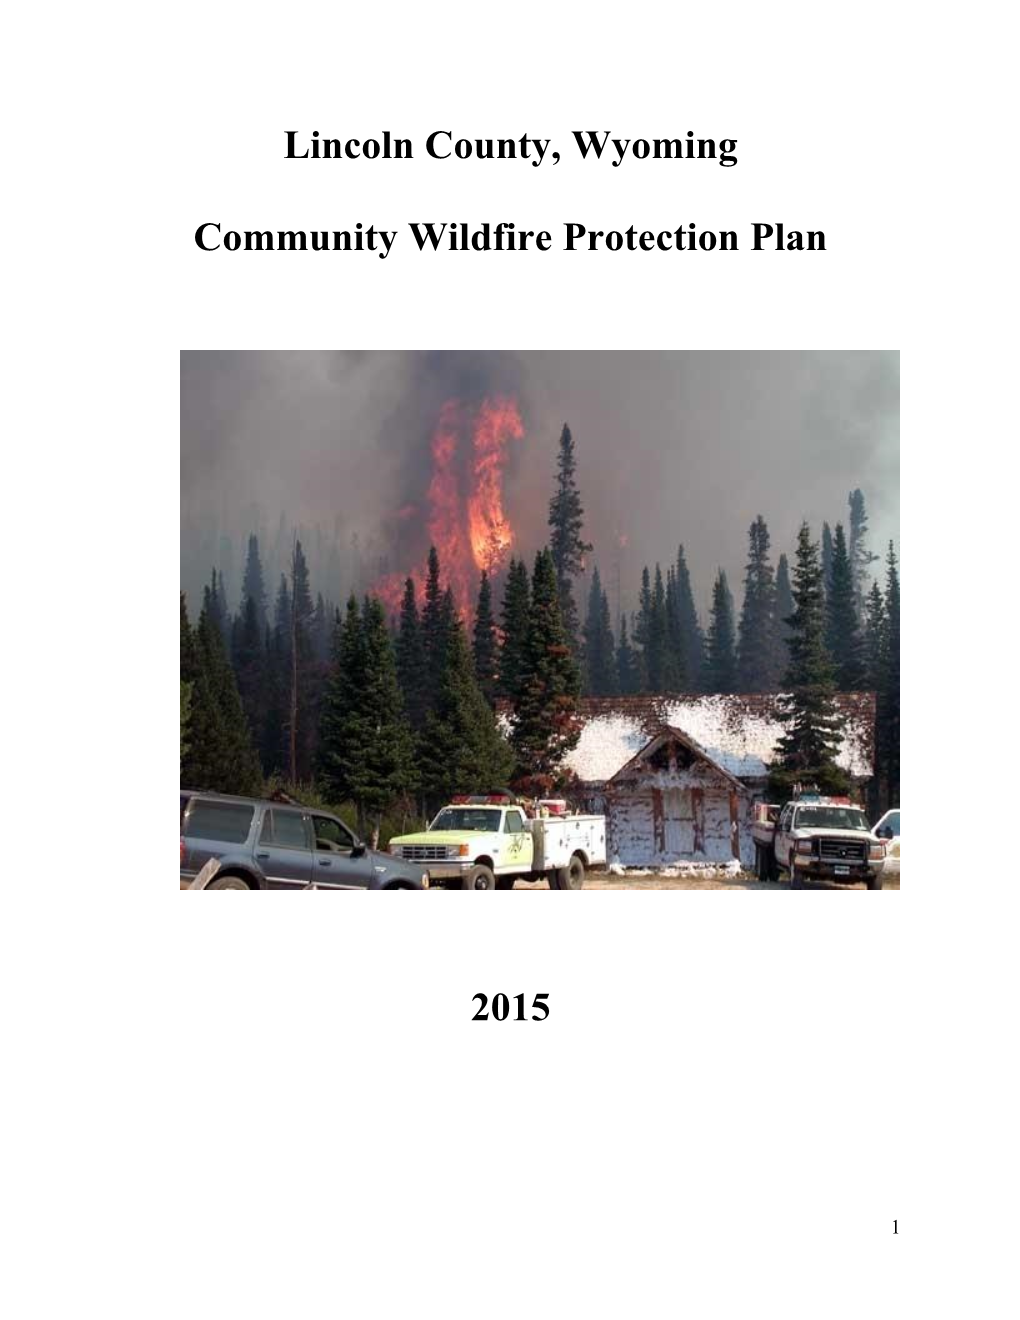 Lincoln County, Wyoming Community Wildfire Protection Plan 2015